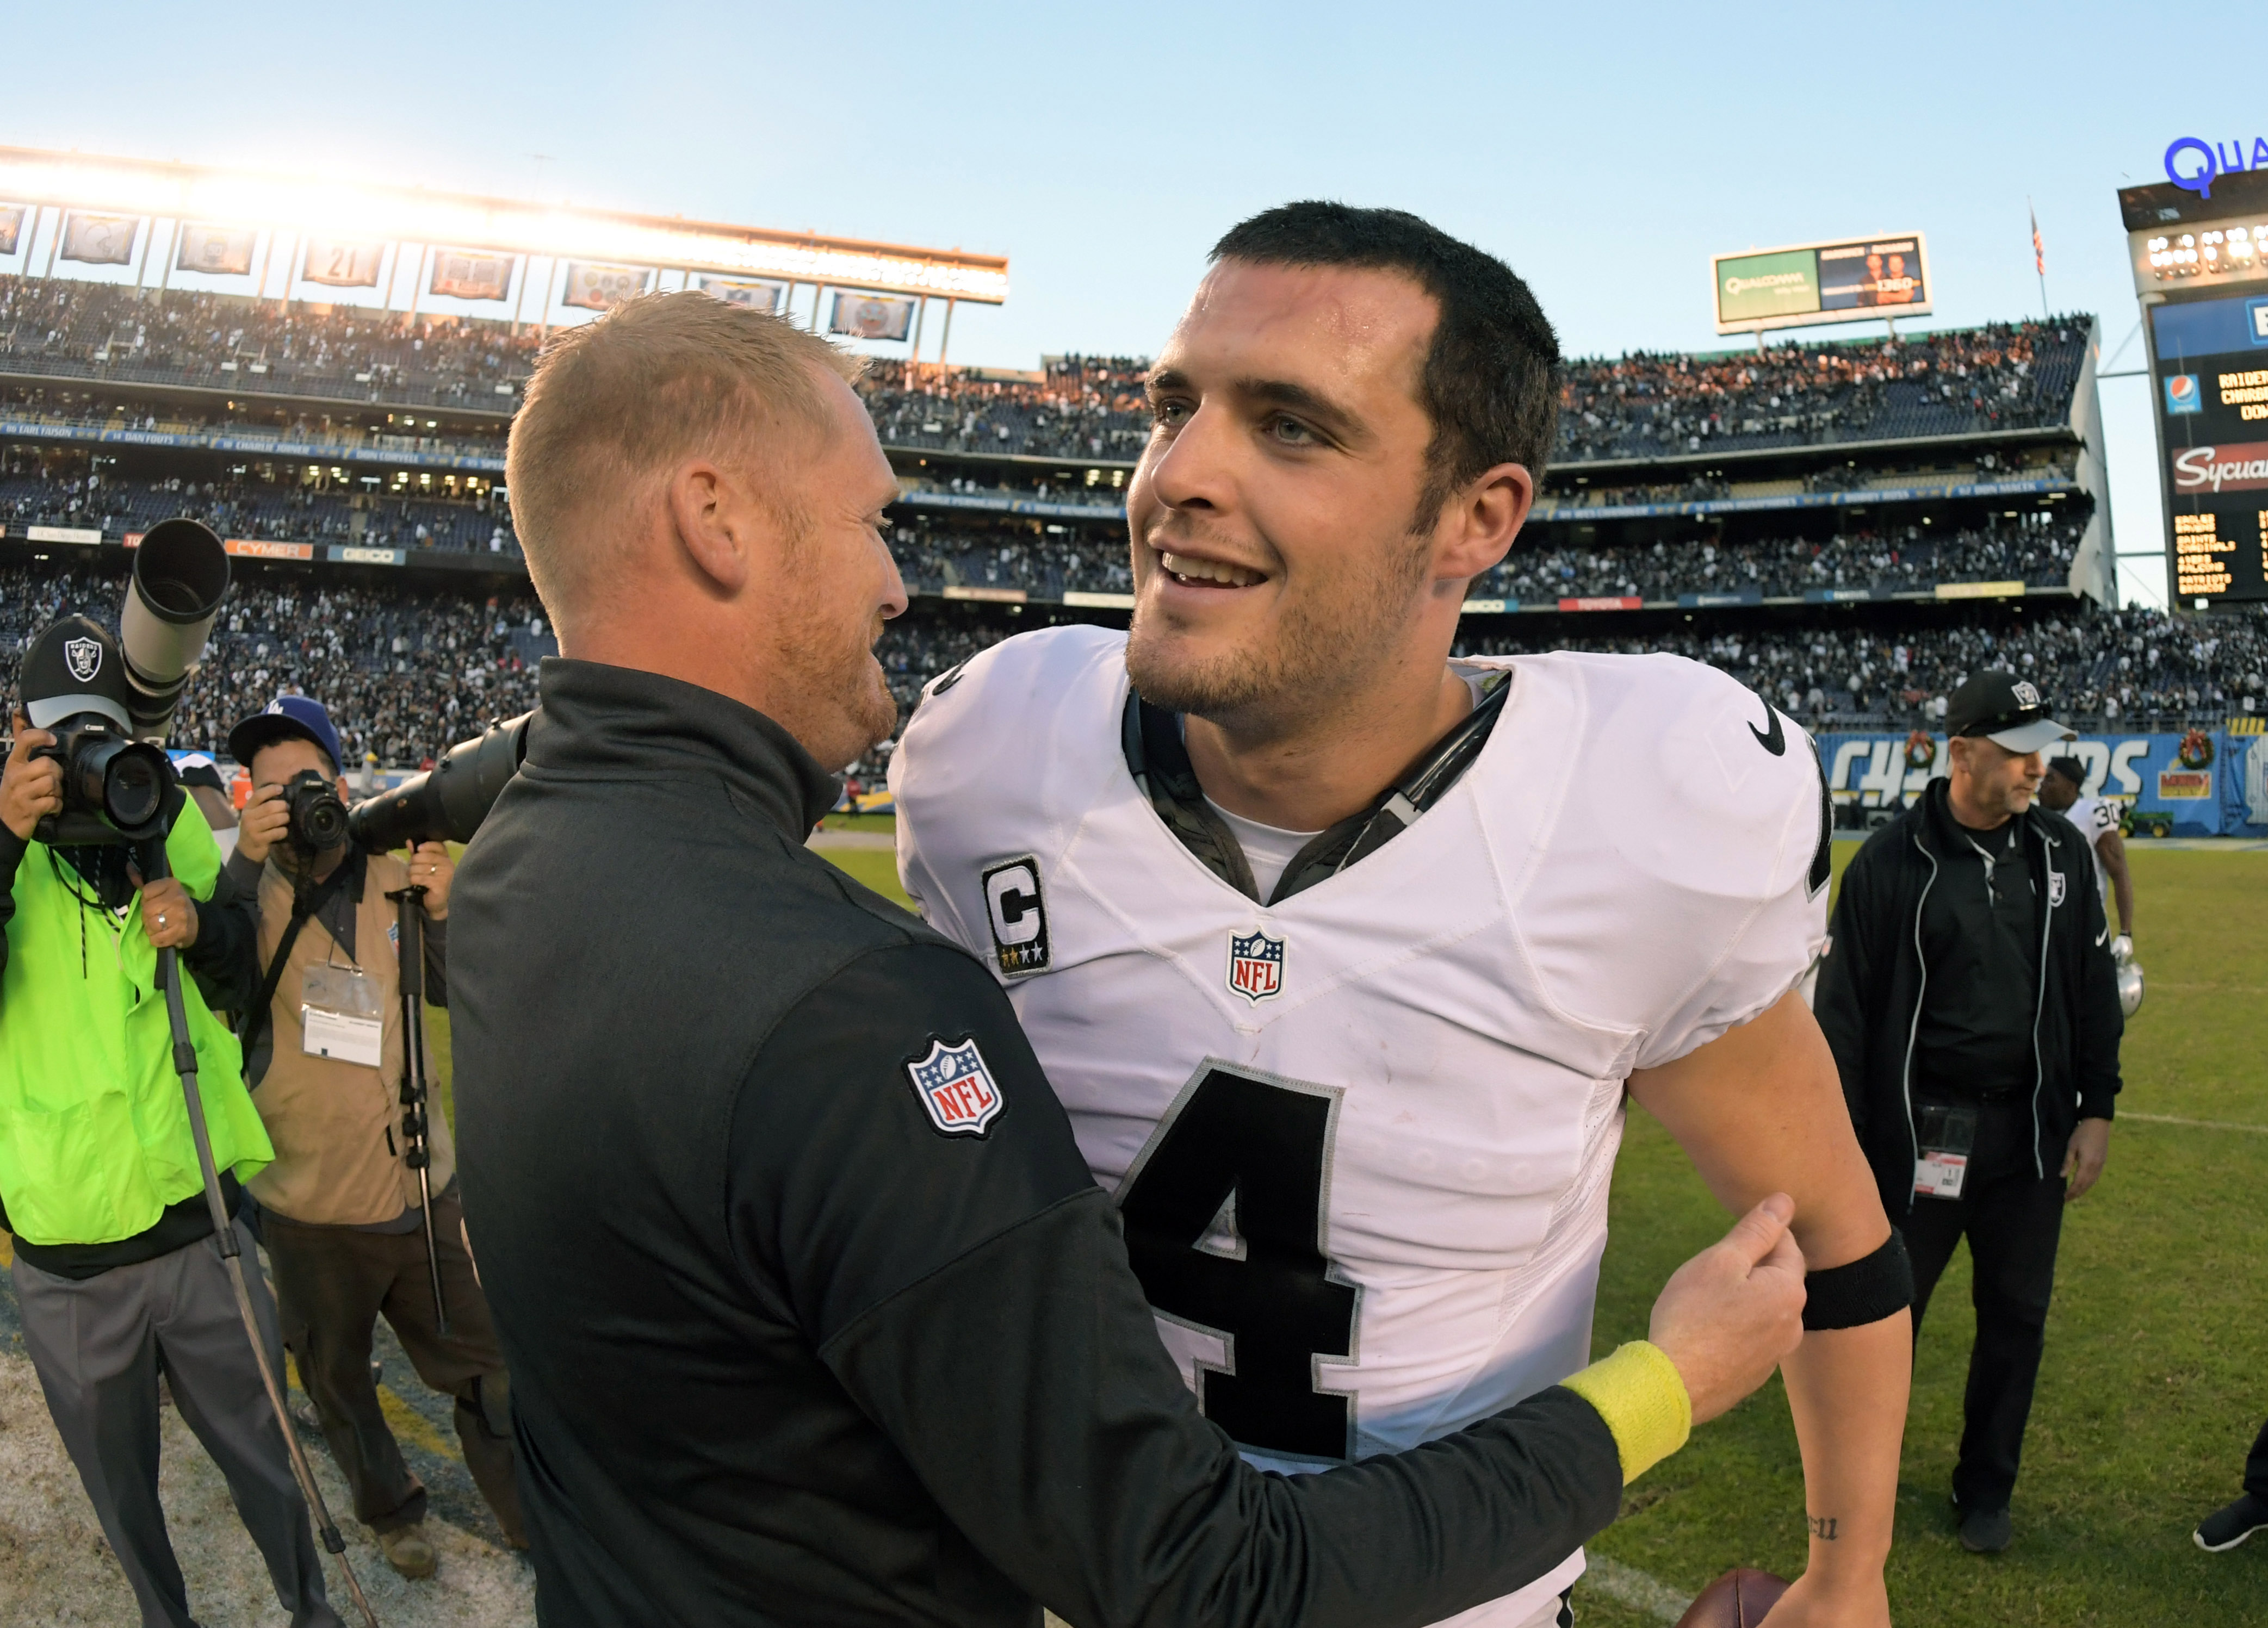 10 great Oakland football memories the Raiders won’t be able to re ...